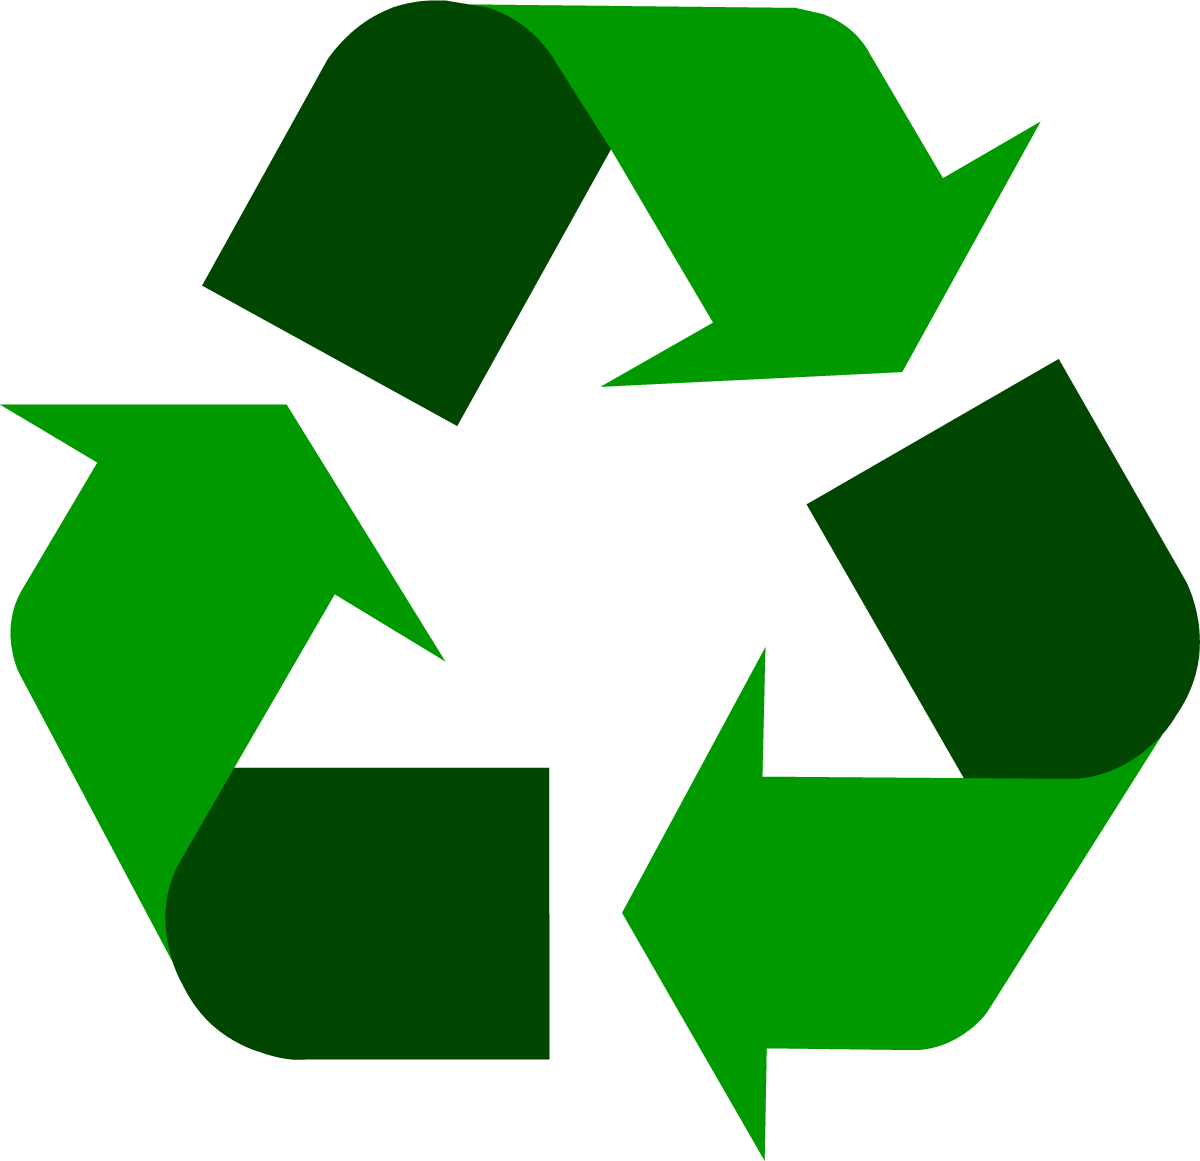 Dark Green Universal Recycling Symbol - Transparent Background Recyclable Logo (1200x1161)